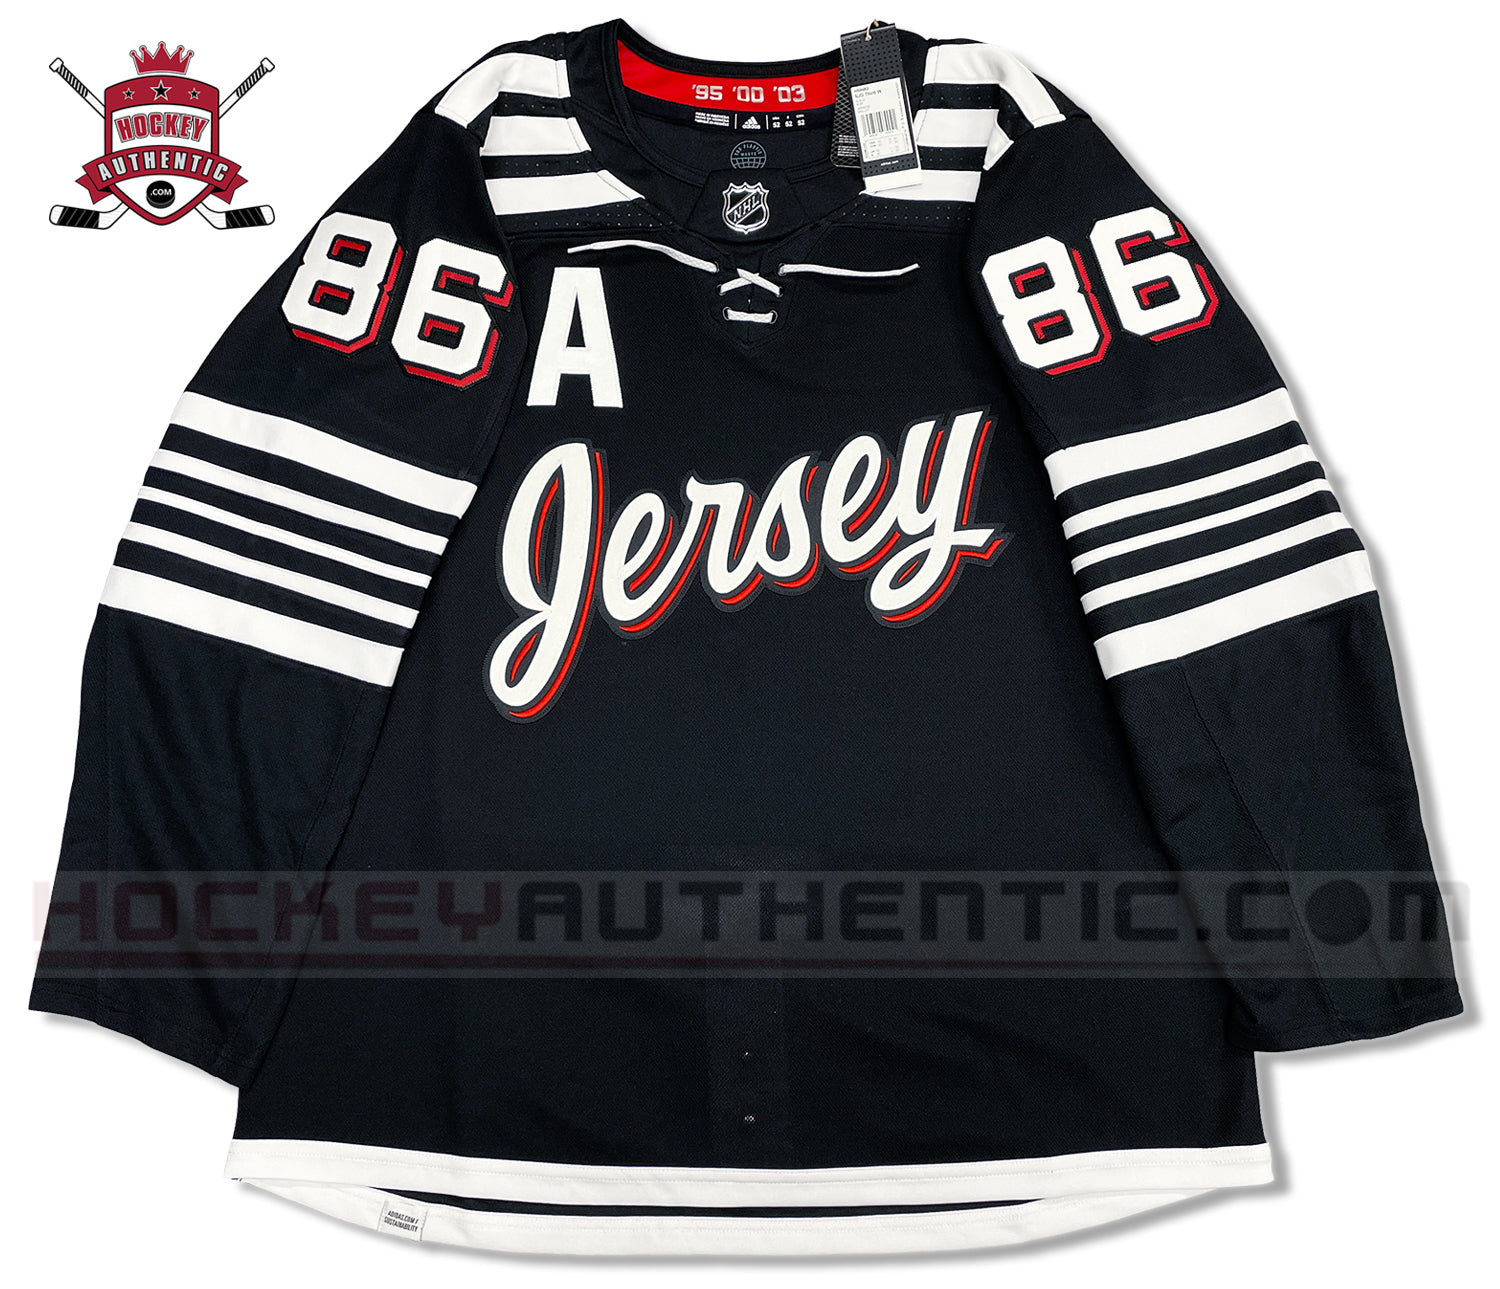 Reviewing The New Jersey Devils' New Alternate Jersey